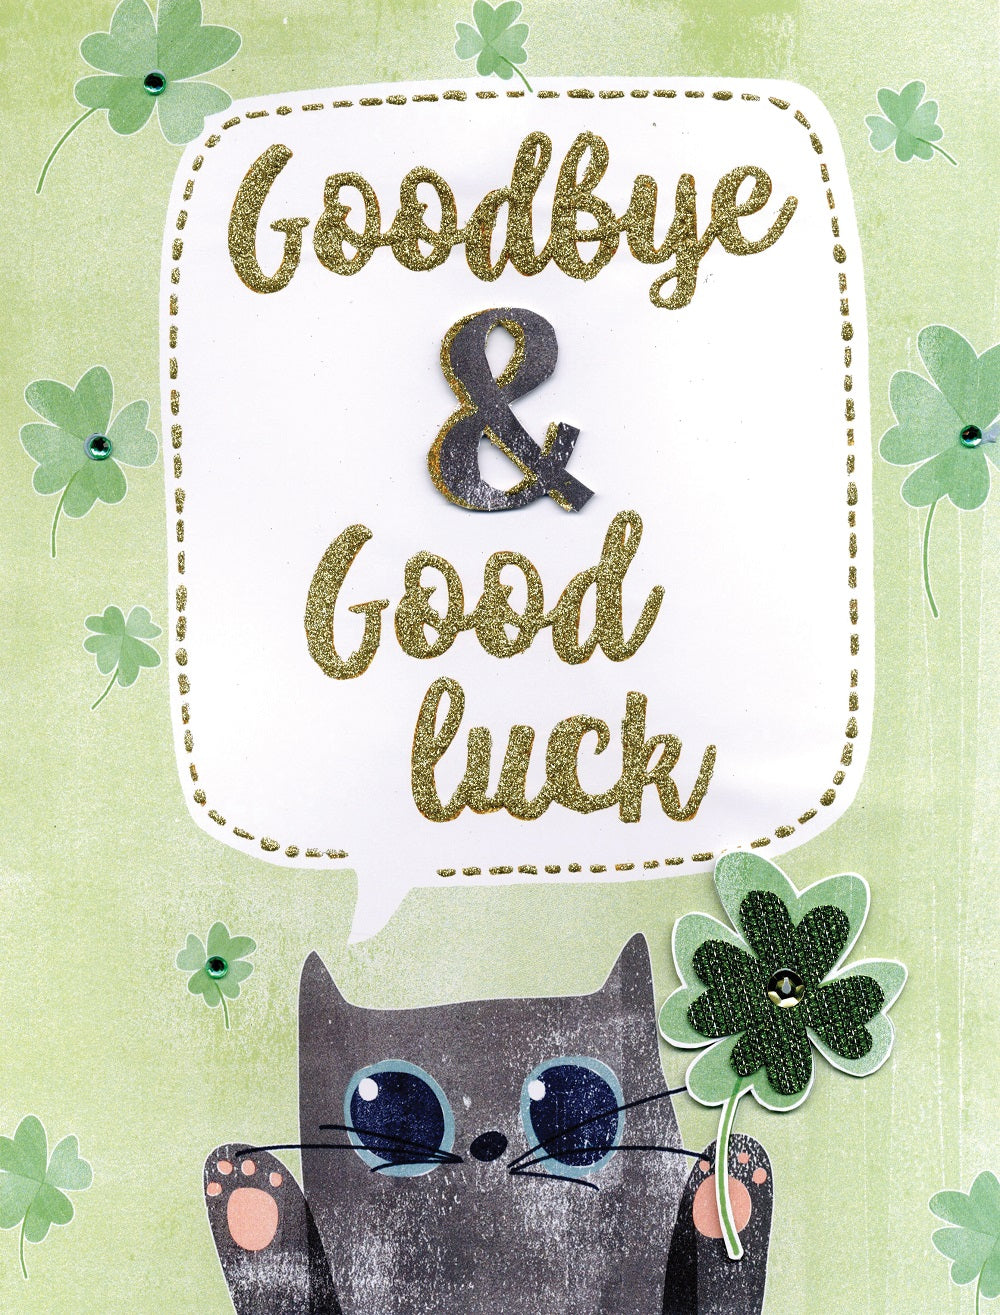 Good Bye & Good Luck Cat Card Gigantic Greeting Card  A4 Sized Cards